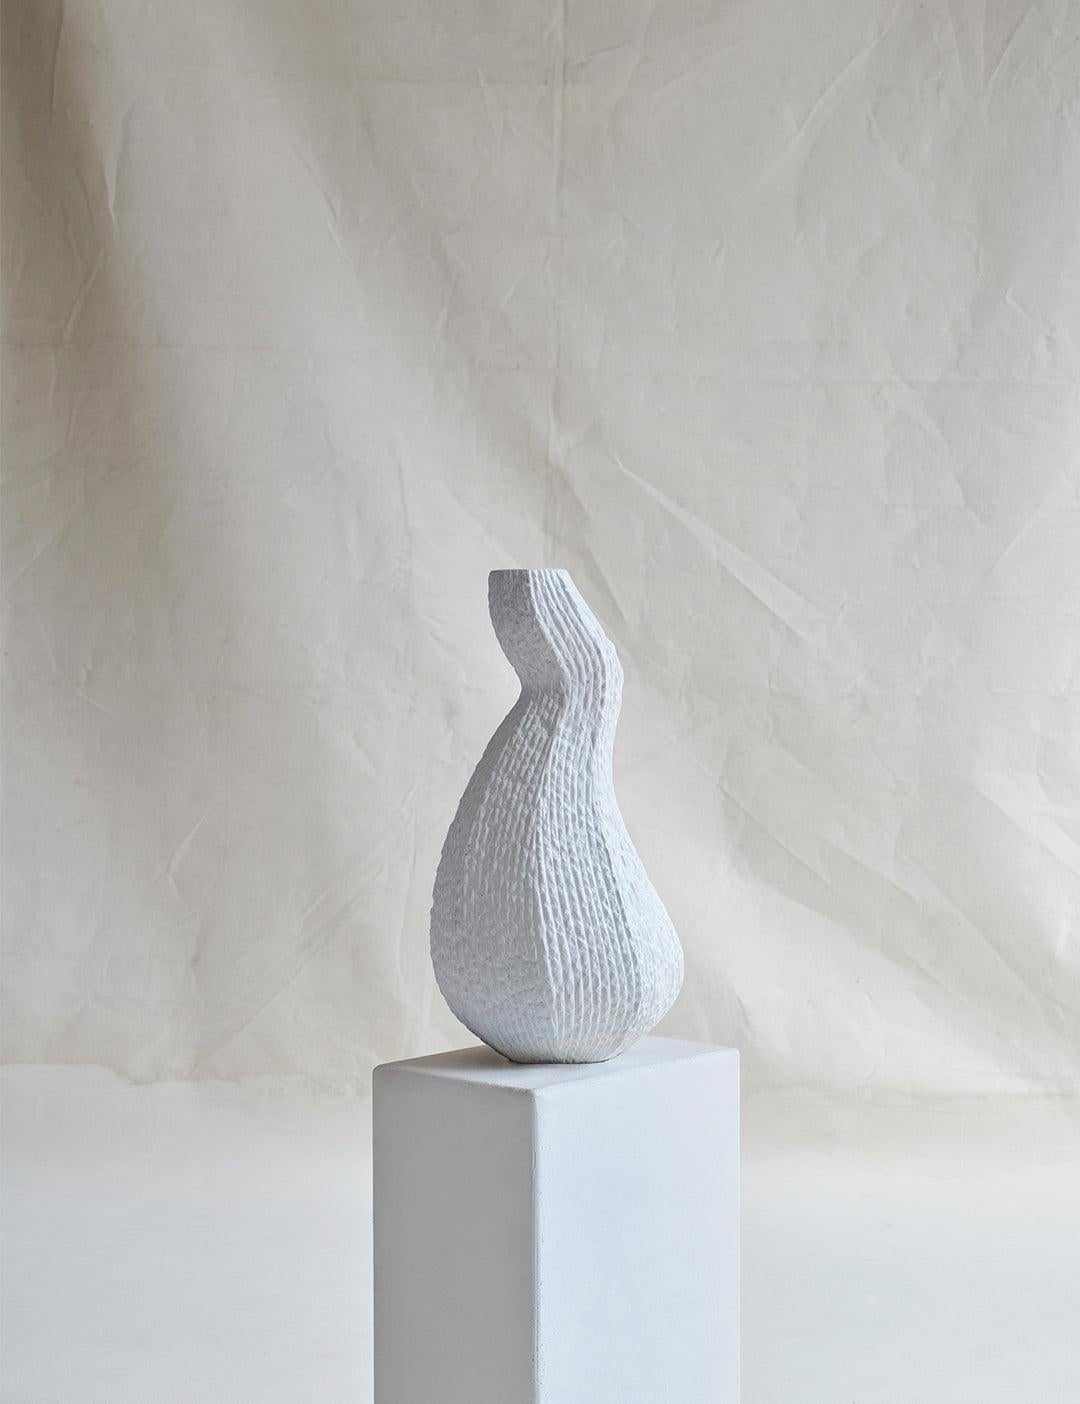 A medium-sized sculptural vessel that brings grandeur to any space it occupies, noted for its organic architecture, striking curves, and natural texture. 

For indoor or outdoor use.

Dimensions (in): 9